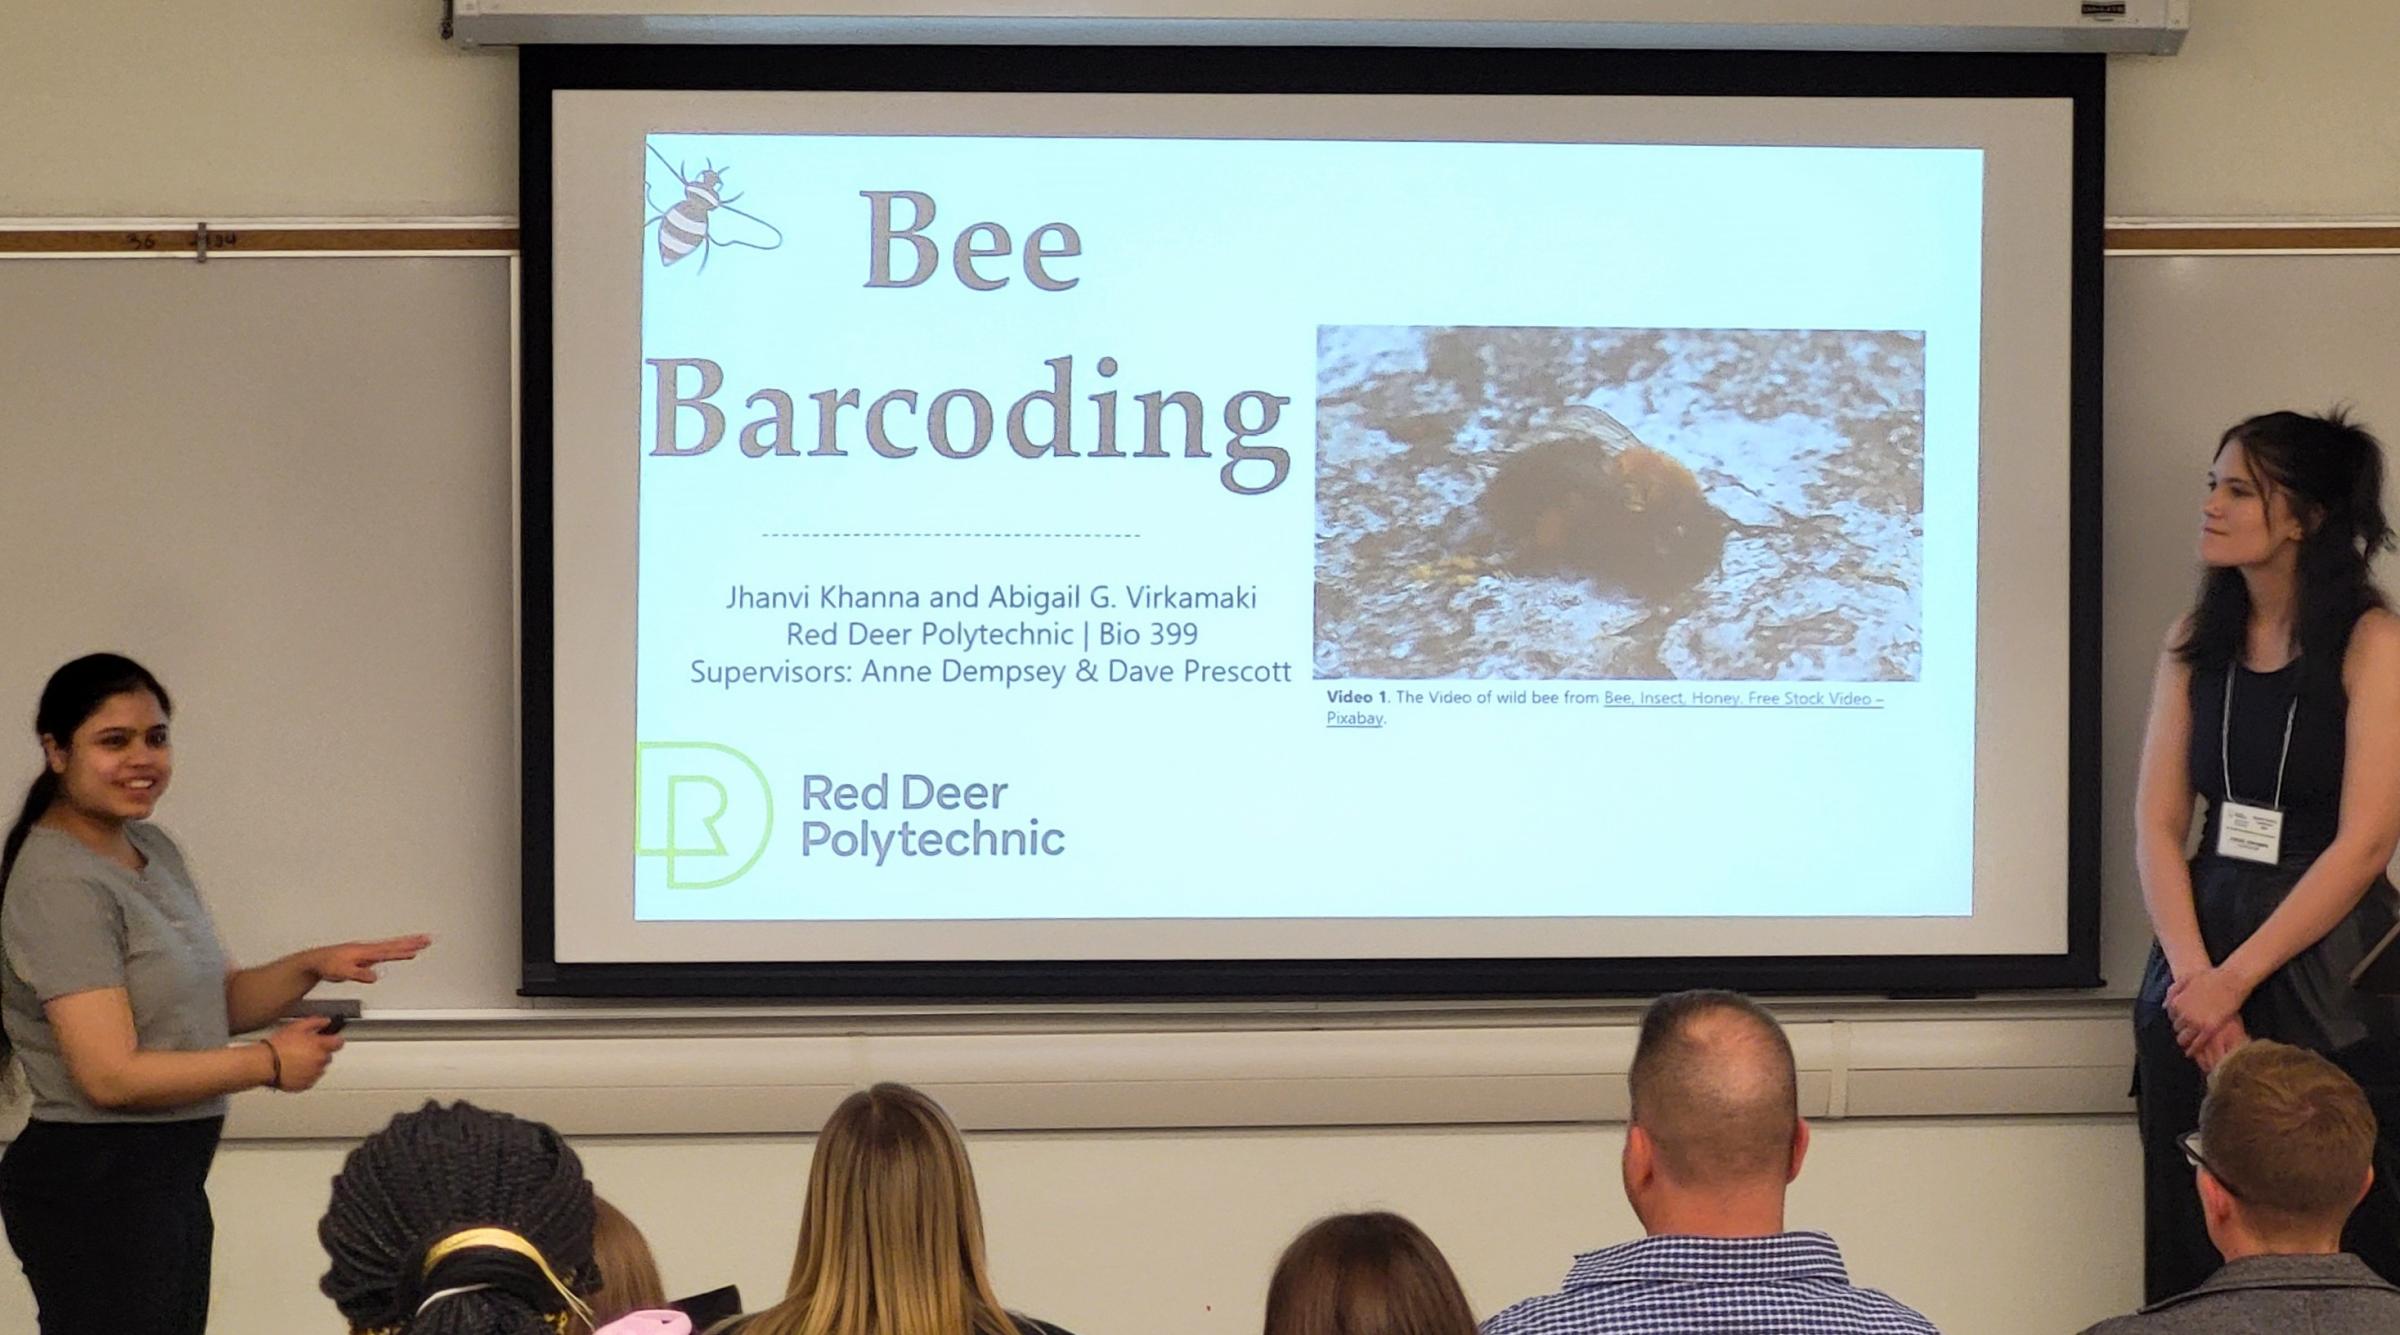 Two female students stand in front of an audience with a presentation being projected called "Bee Barcoding"